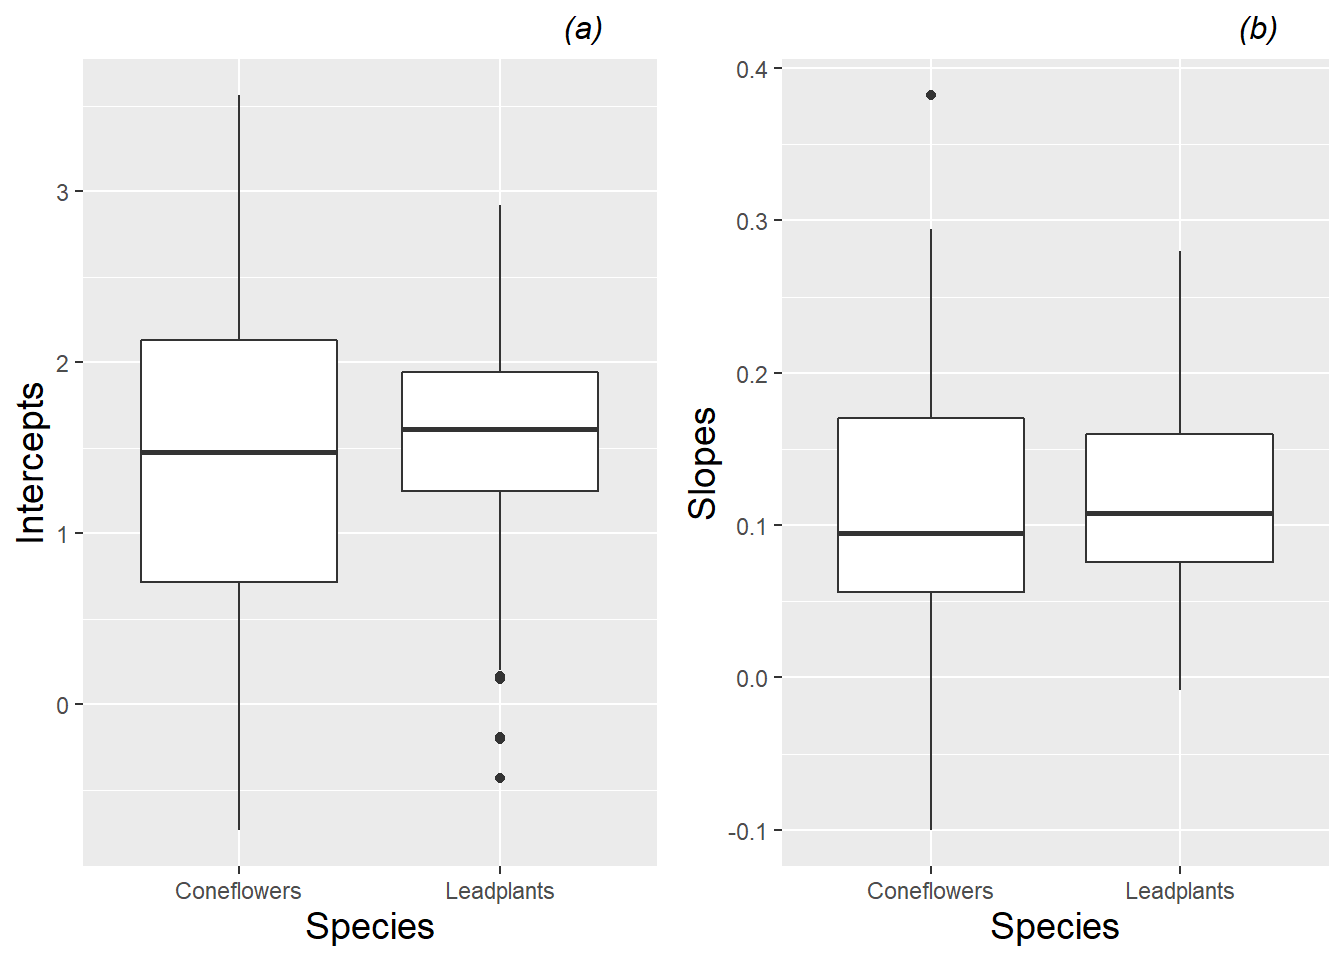 Boxplots of (a) intercepts and (b) slopes for all plants by species, based on a linear fit to height data from each plant.